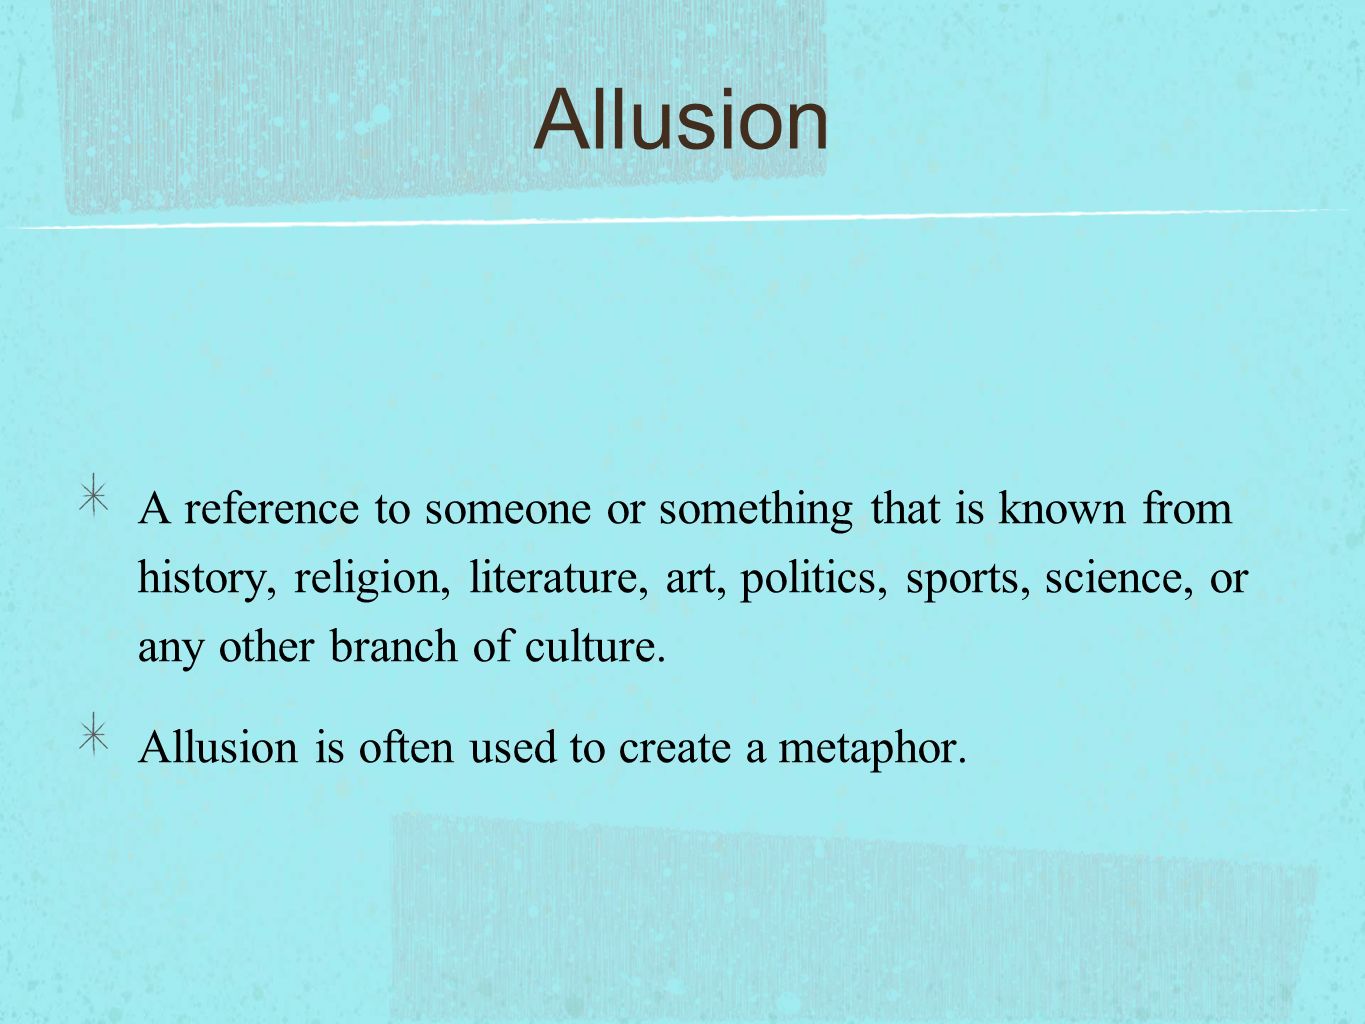 Allusion A reference to someone or something that is known from history, religion, literature, art, politics, sports, science, or any other branch of culture.